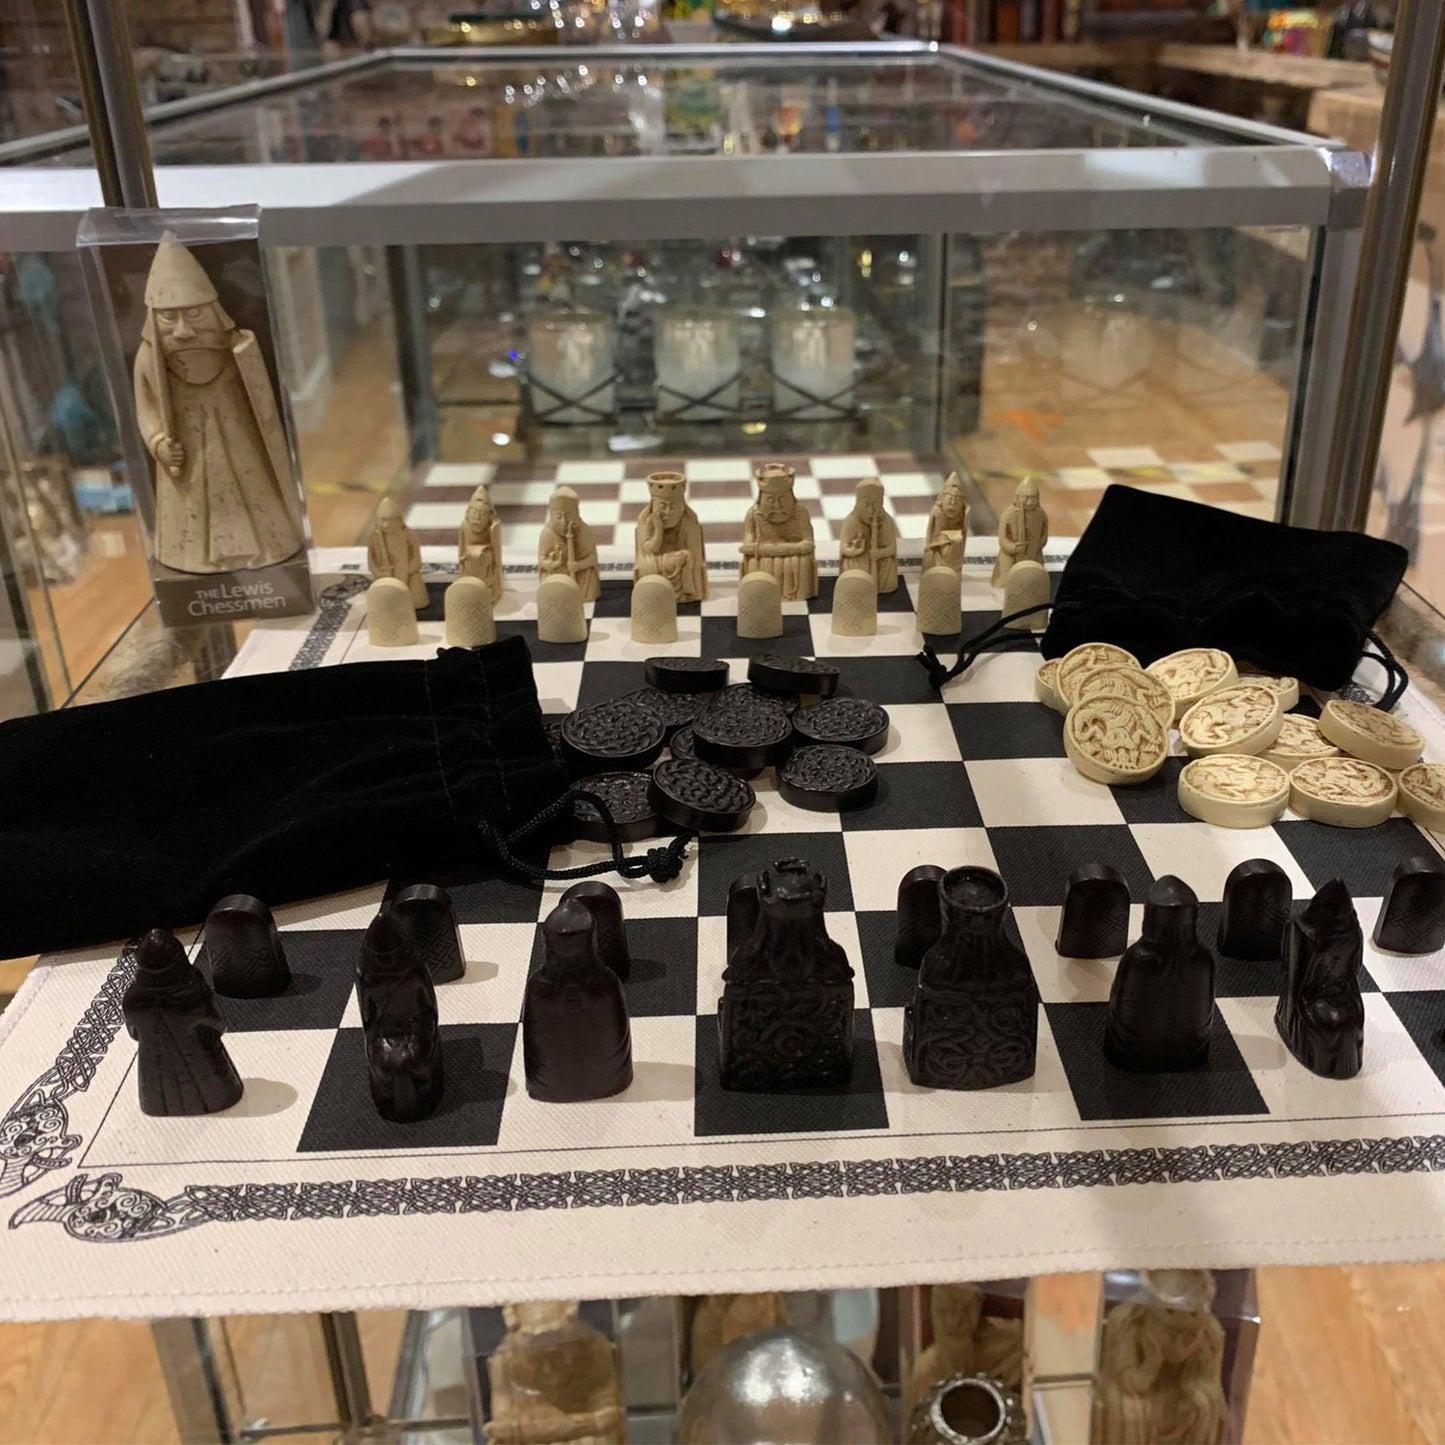 The Lewis Chessmen: Historical Chess ad Draughts Set Reproduction Close-up in a Display Case | Happy Piranha